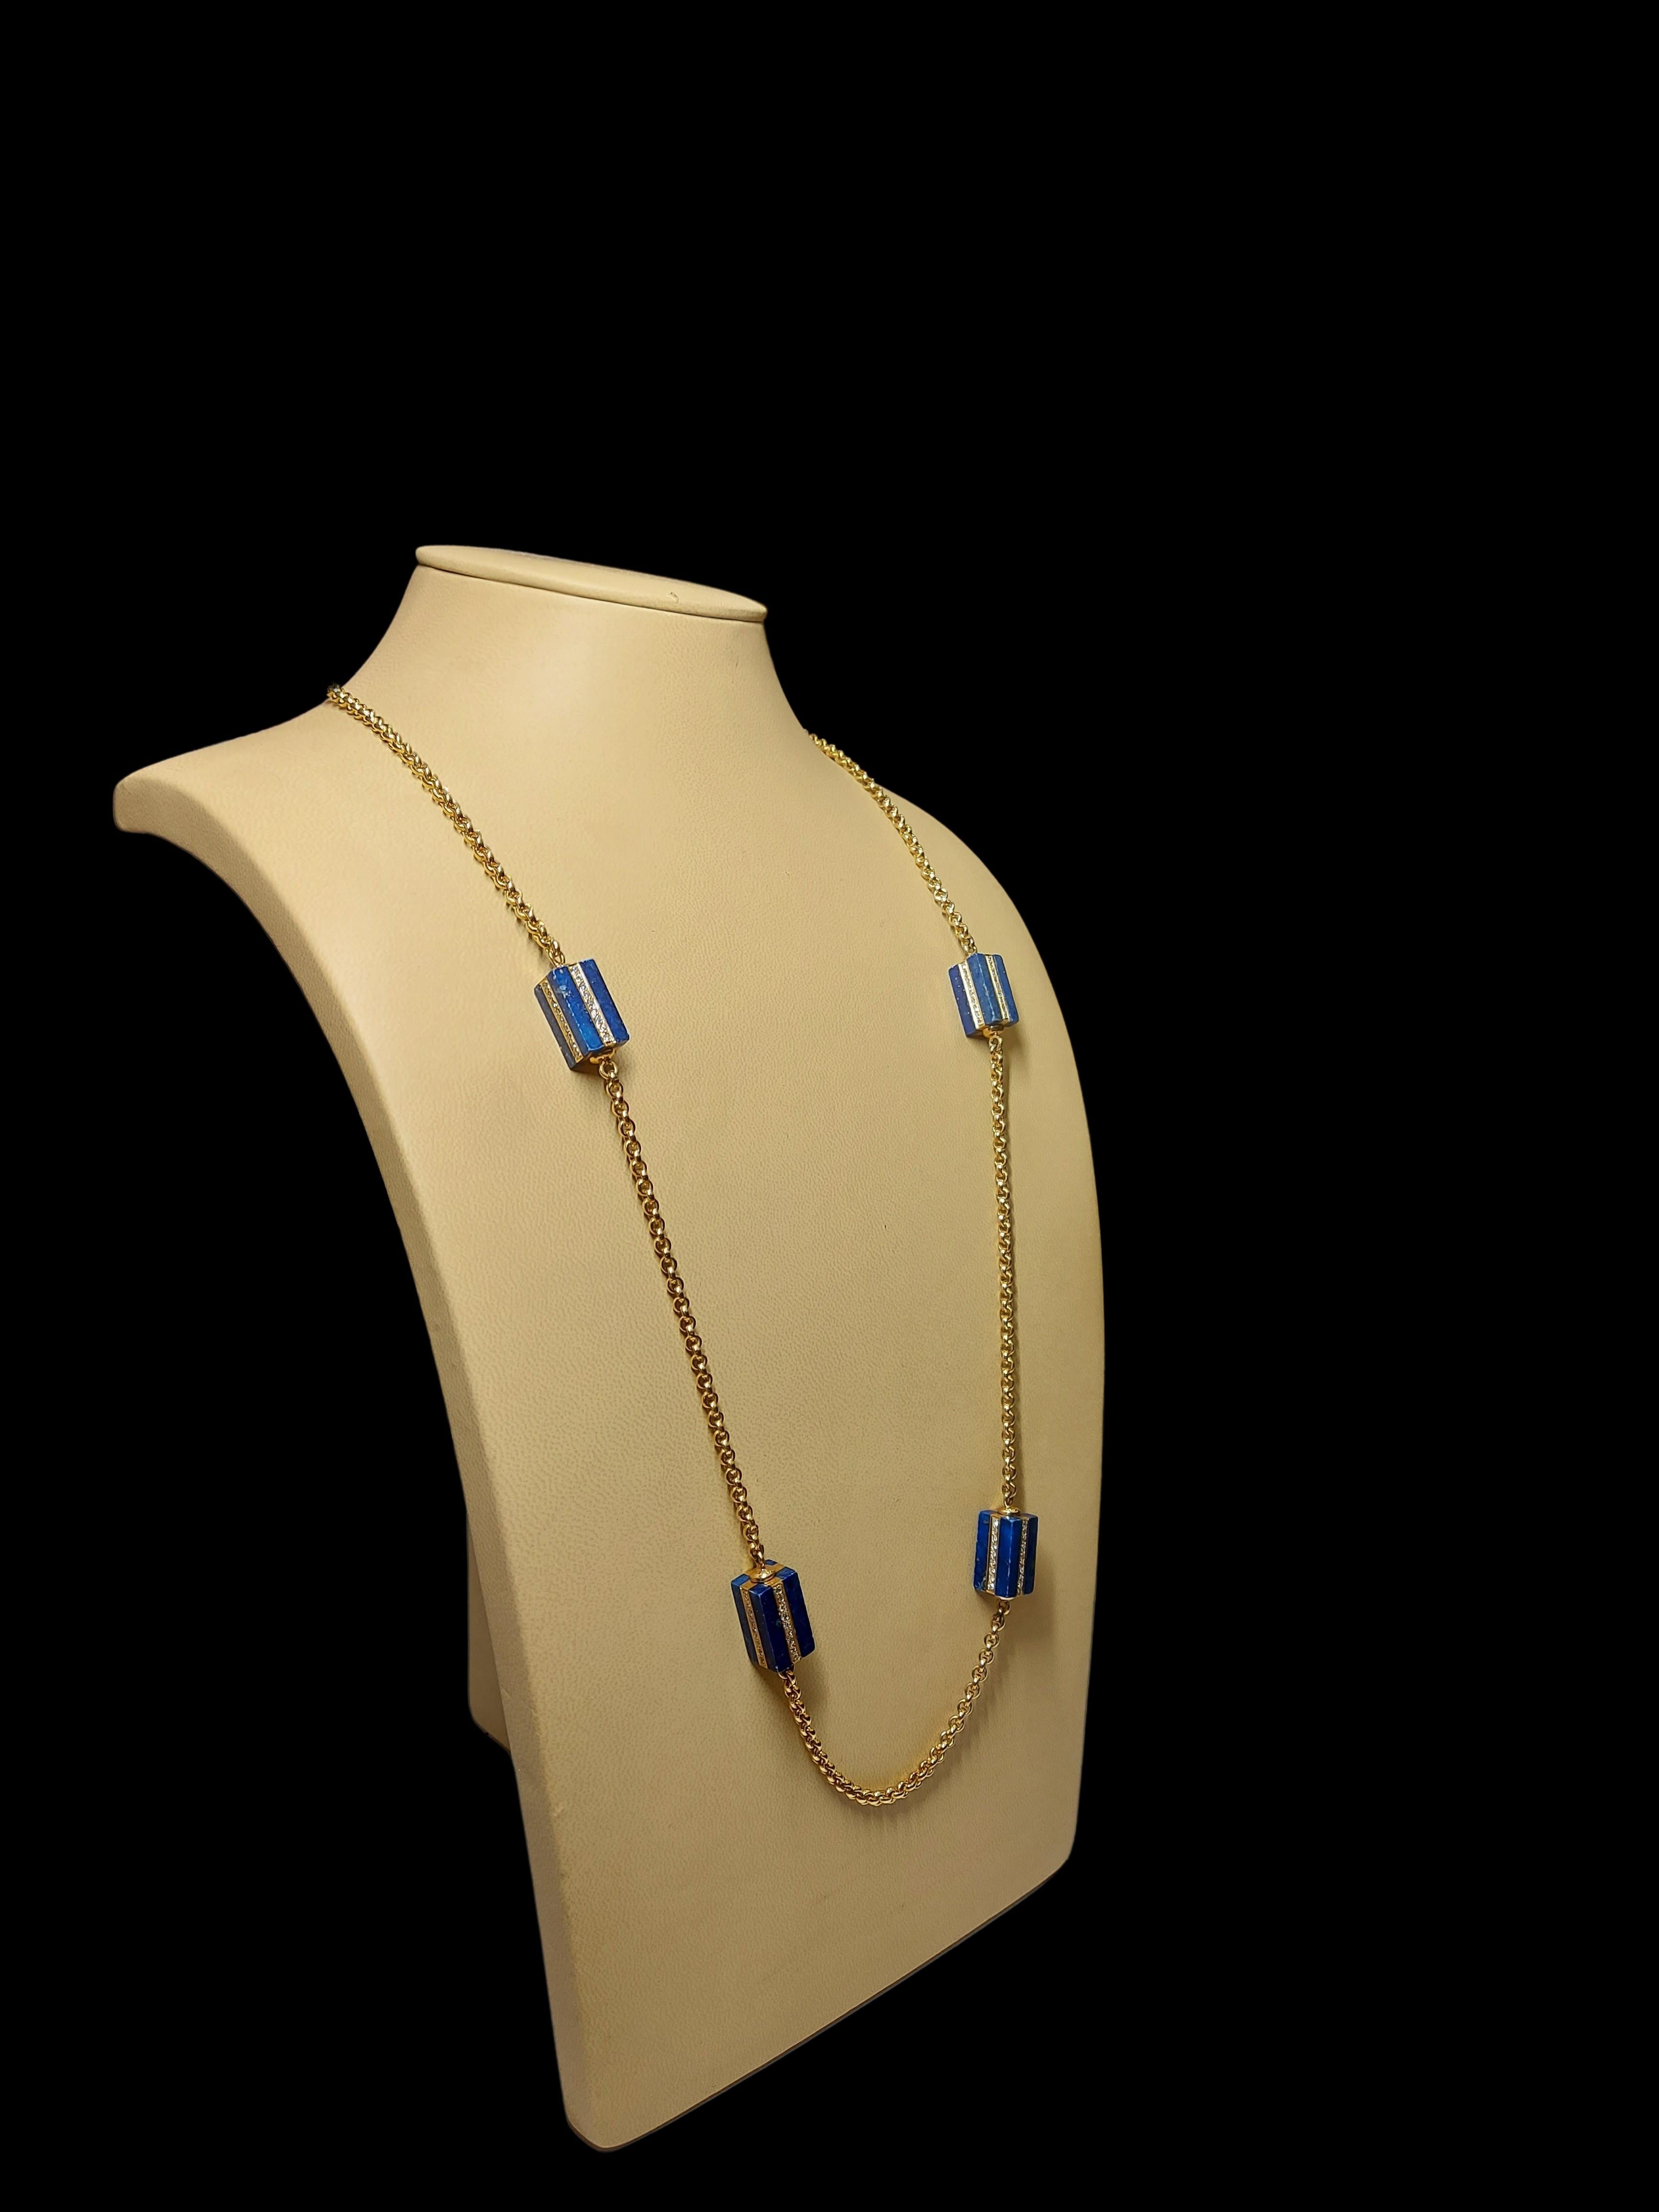 Long Necklace with Lapis Lazuli and 4.32 Ct Diamonds, Estate Sultan Oman Qaboos For Sale 1